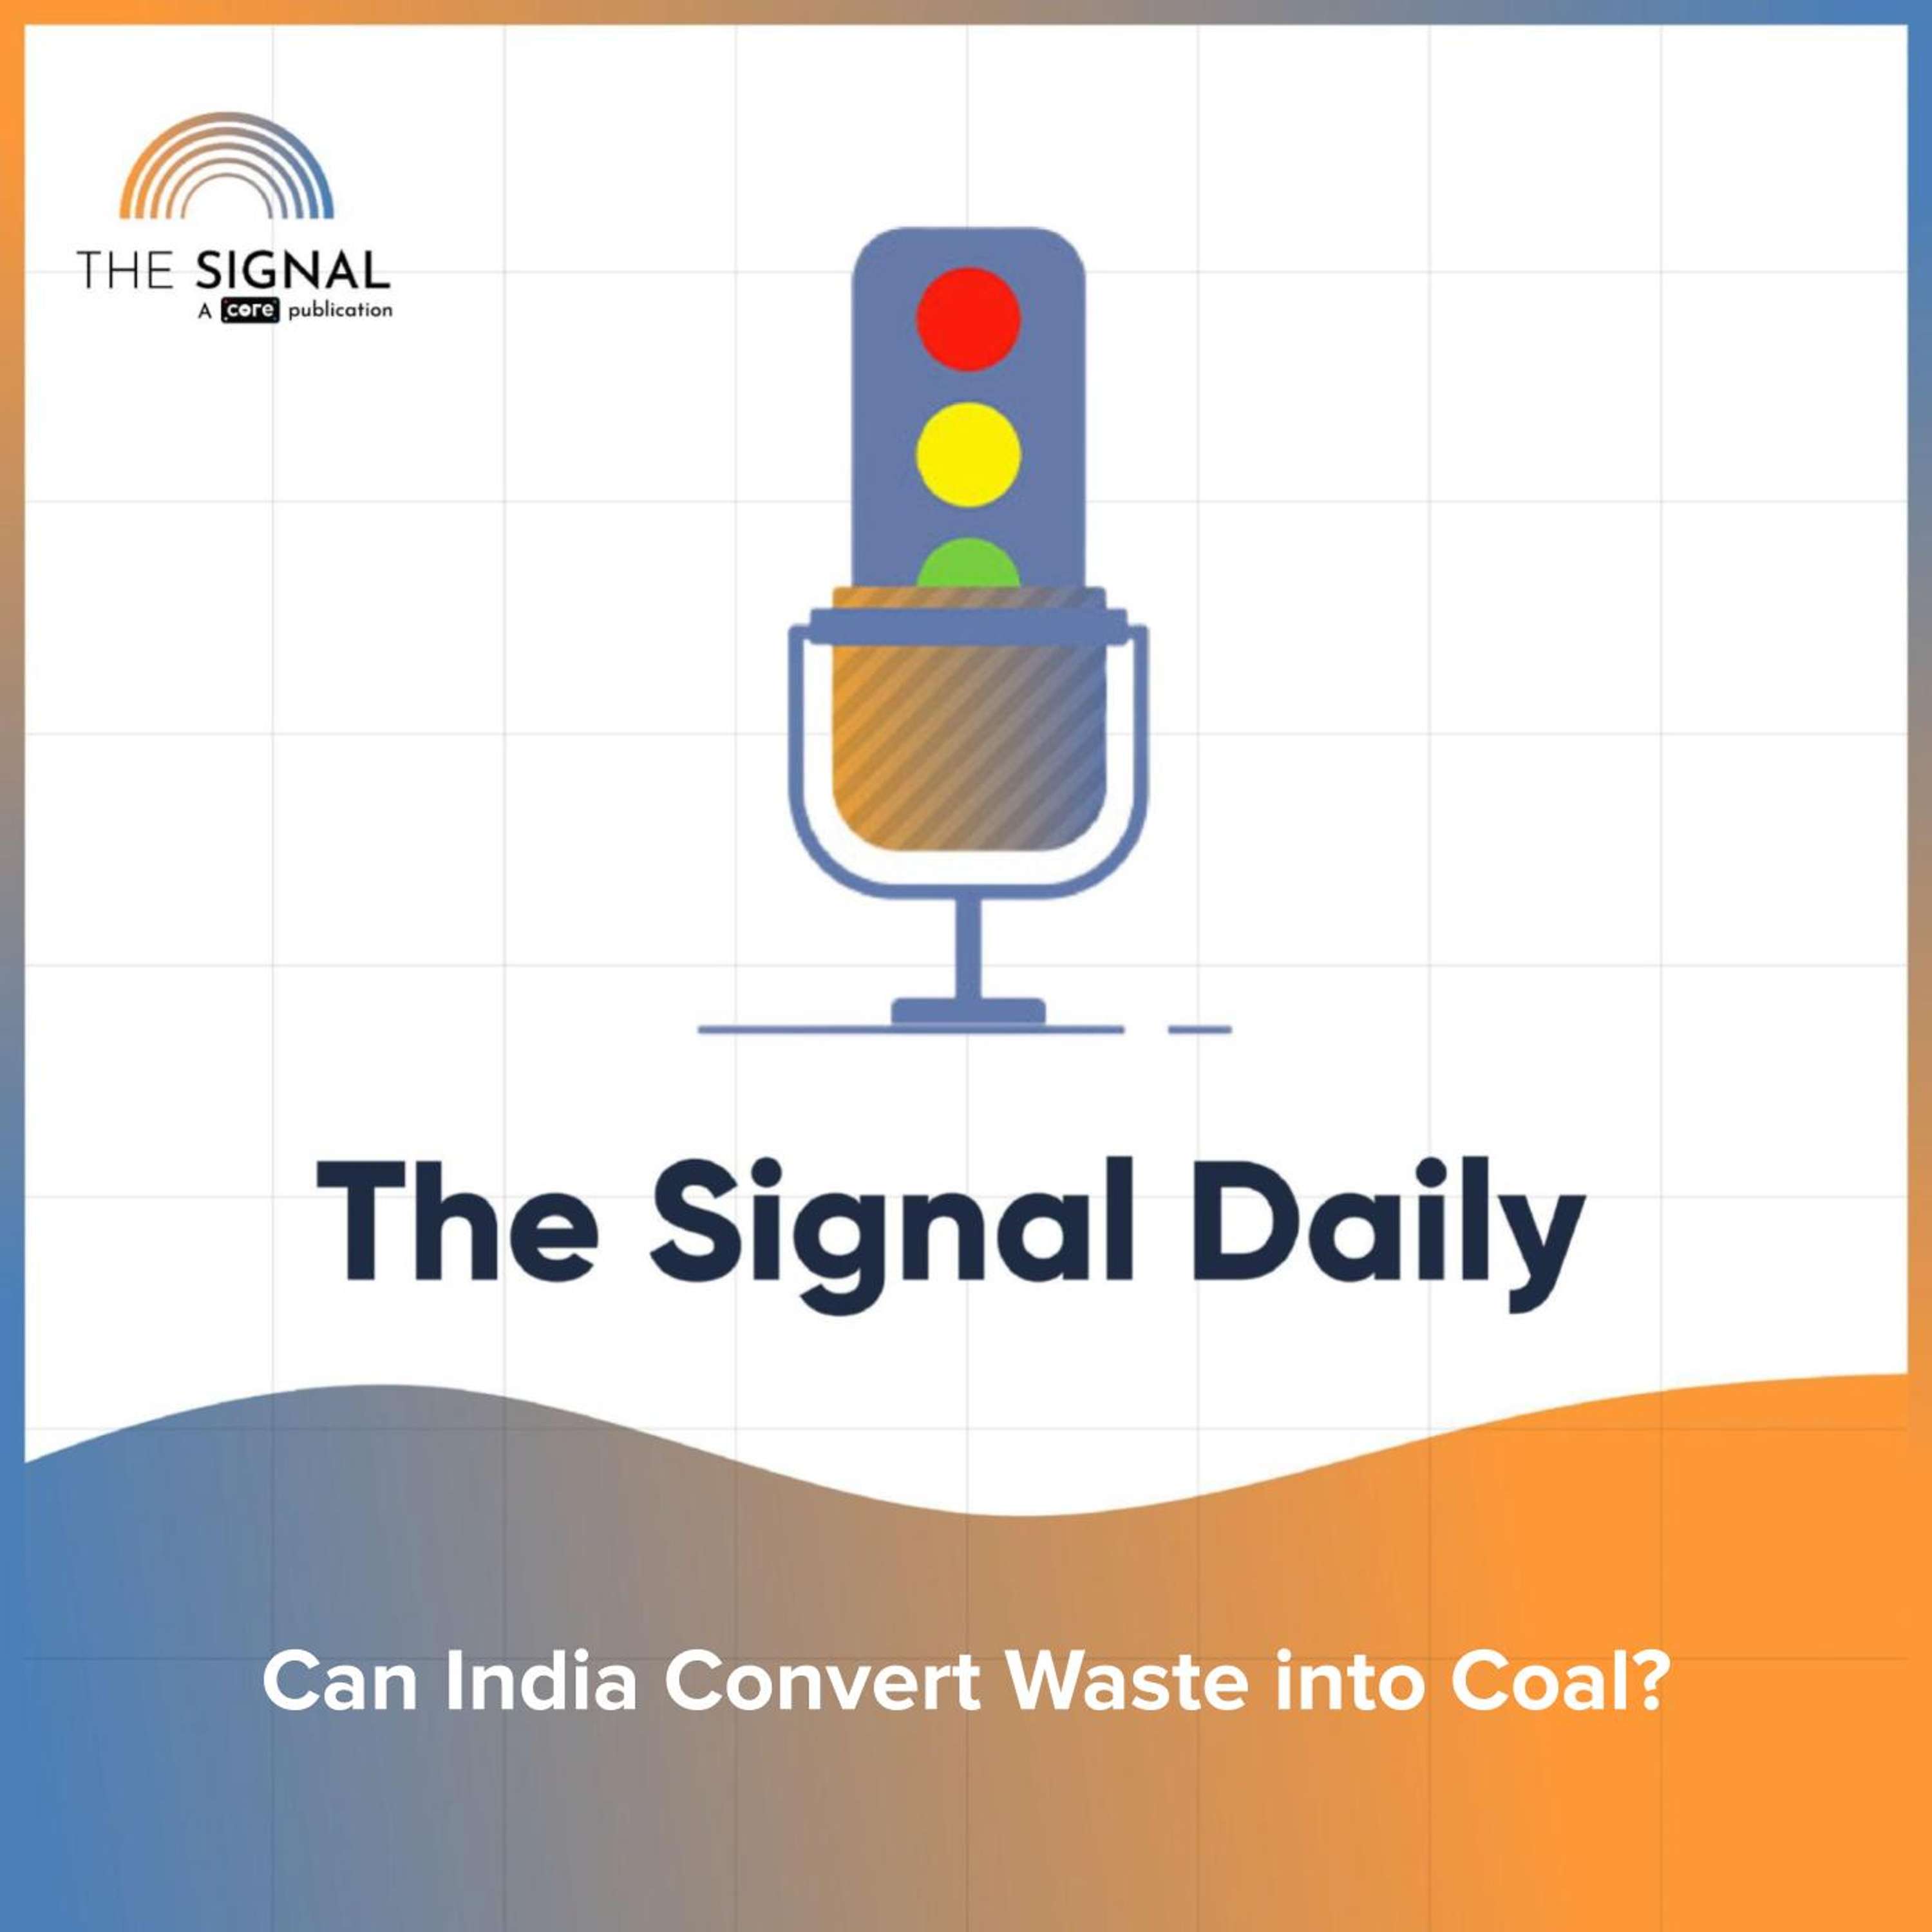 Can India Convert Waste into Coal?